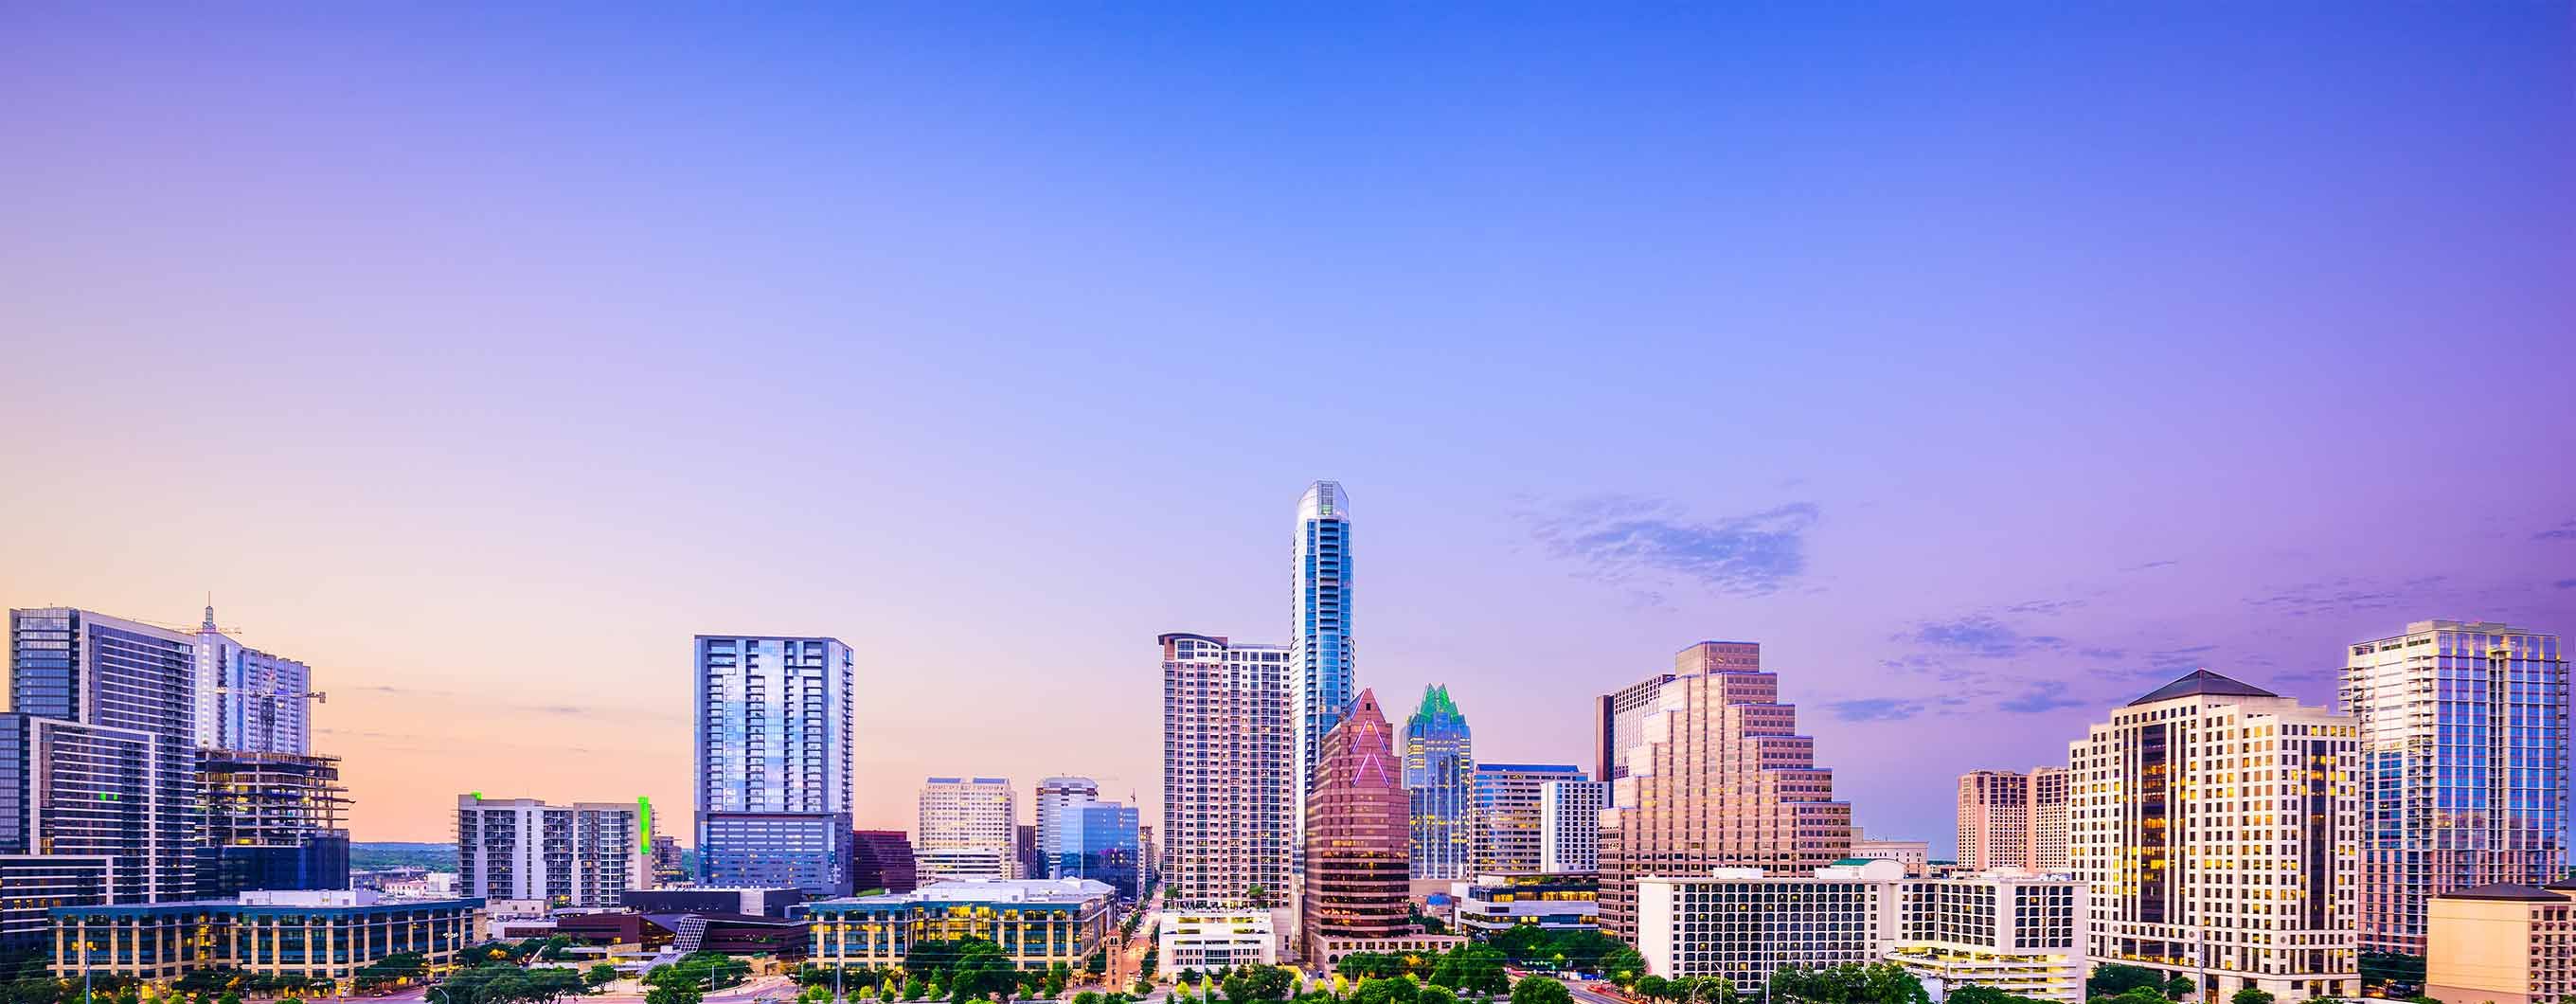 Image of the Austin city skyline with a blue and purple sky behind the buildings with a few small clouds